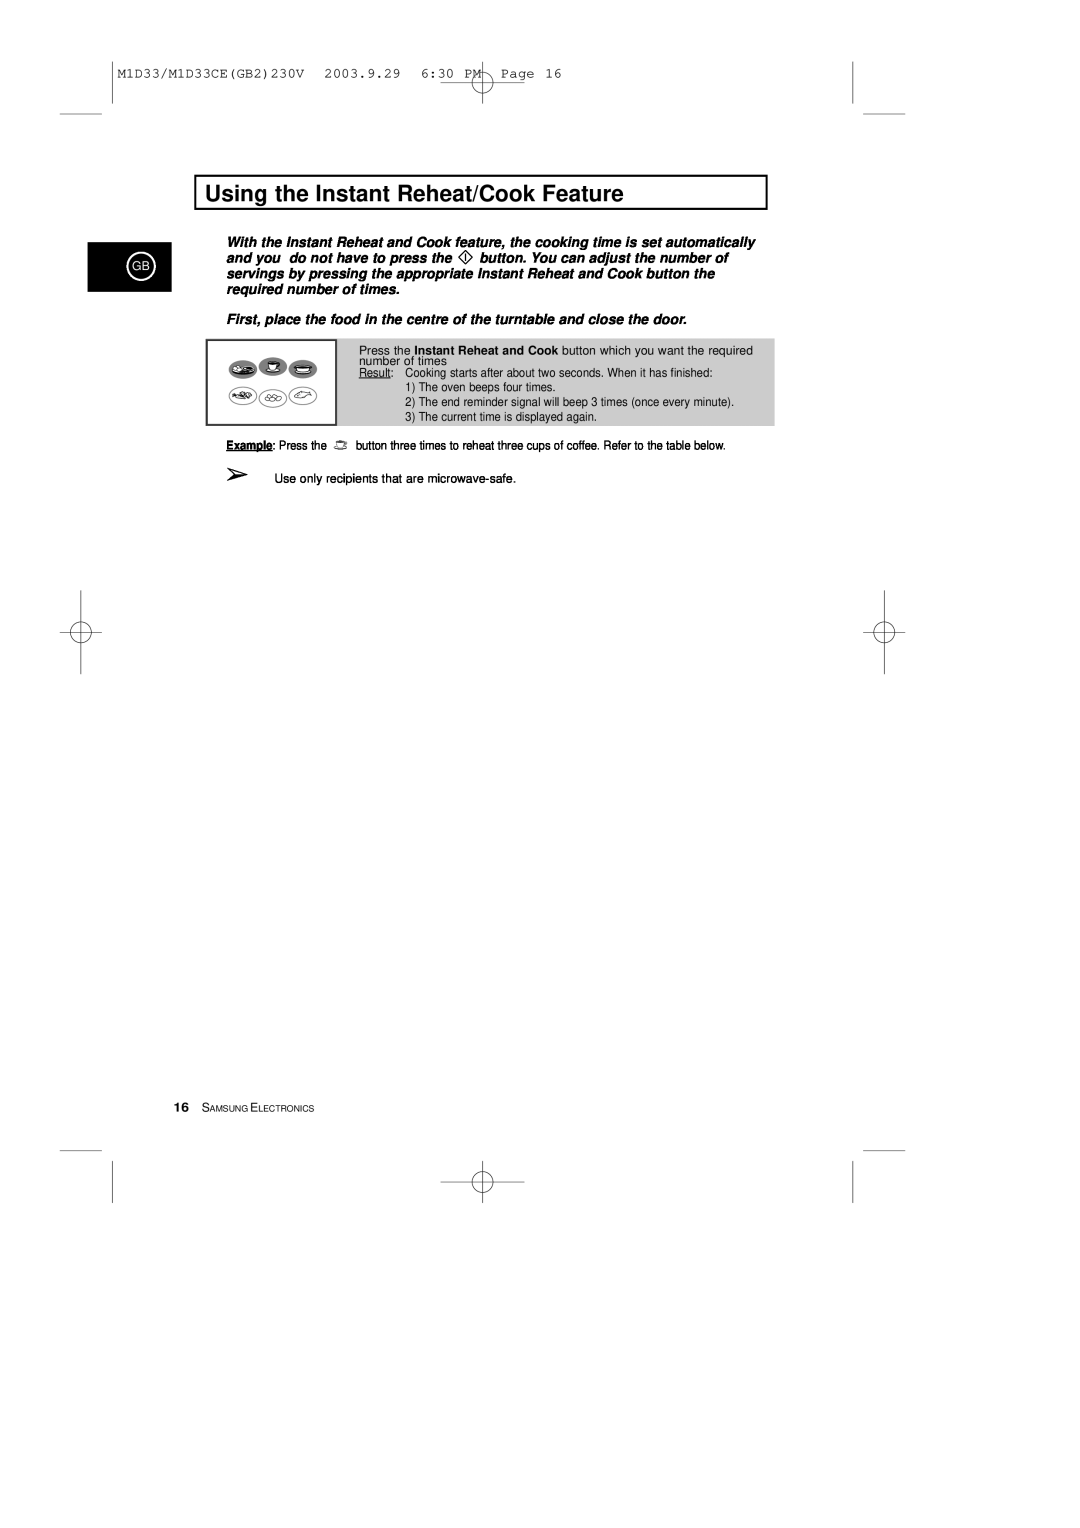 Samsung M1D33CE manual Using the Instant Reheat/Cook Feature, Samsung Electronics 